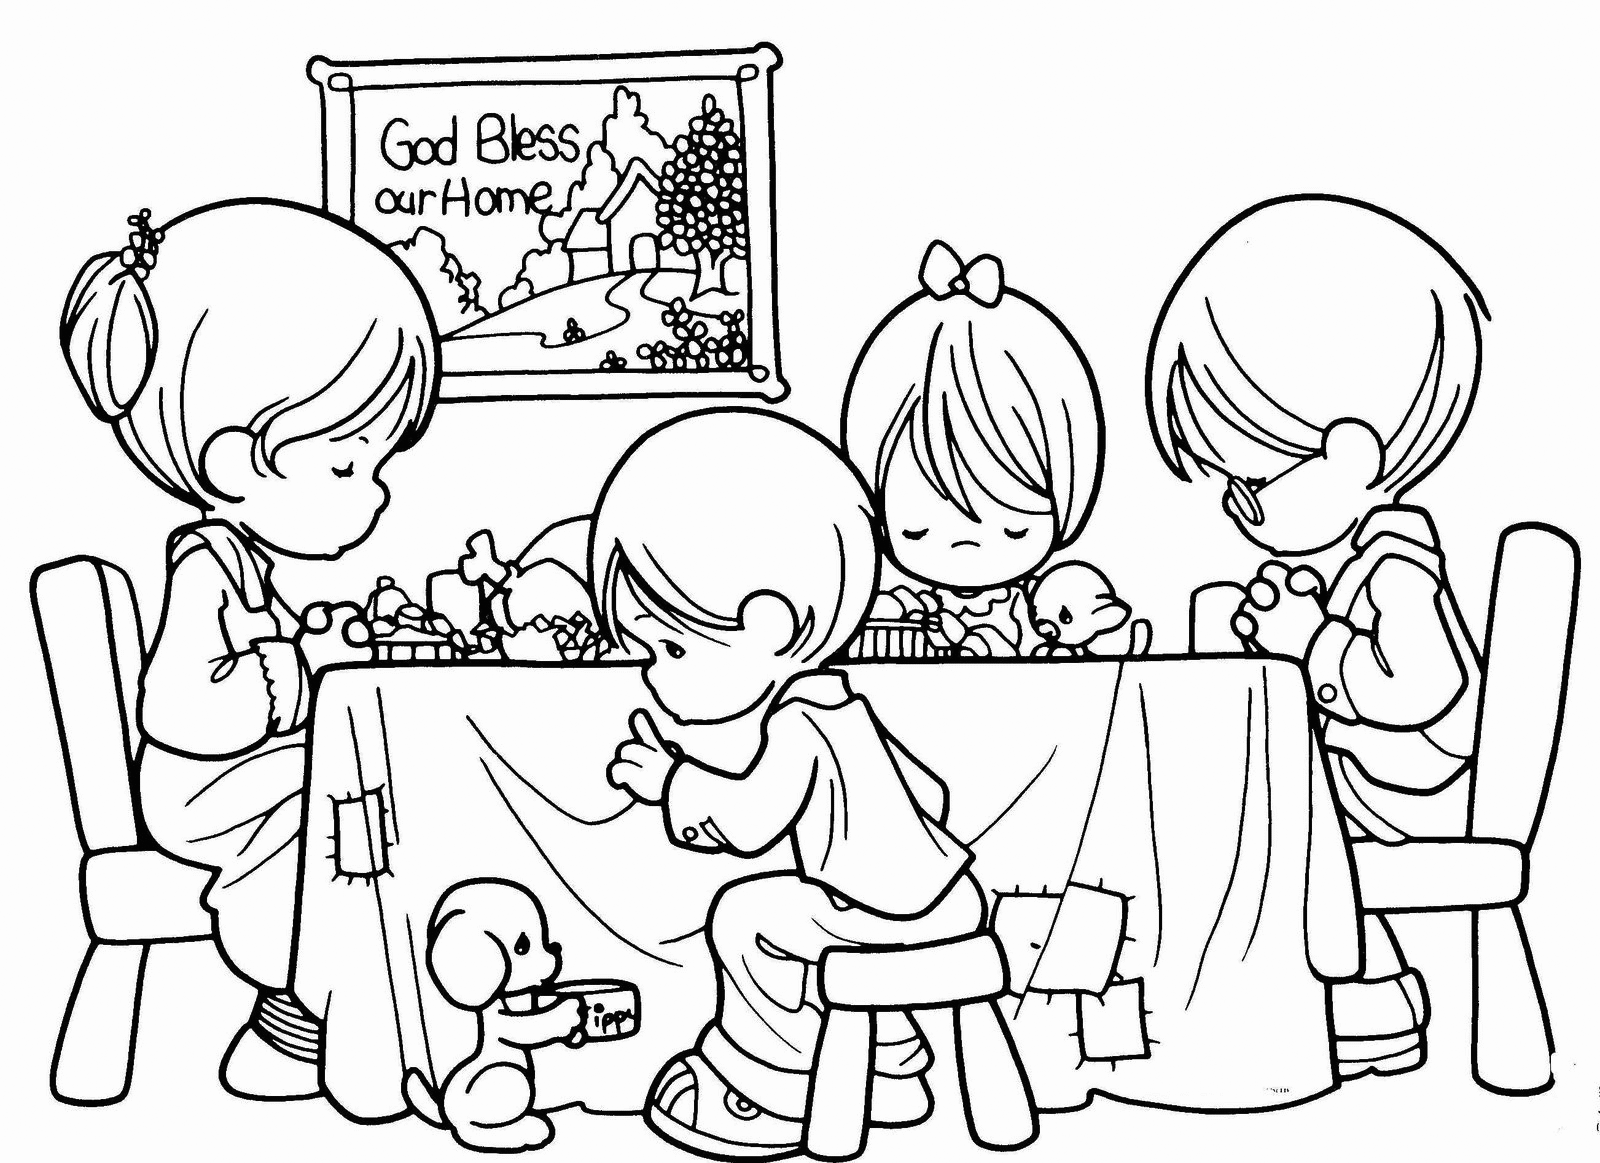 prayer-coloring-pages-best-coloring-pages-for-kids